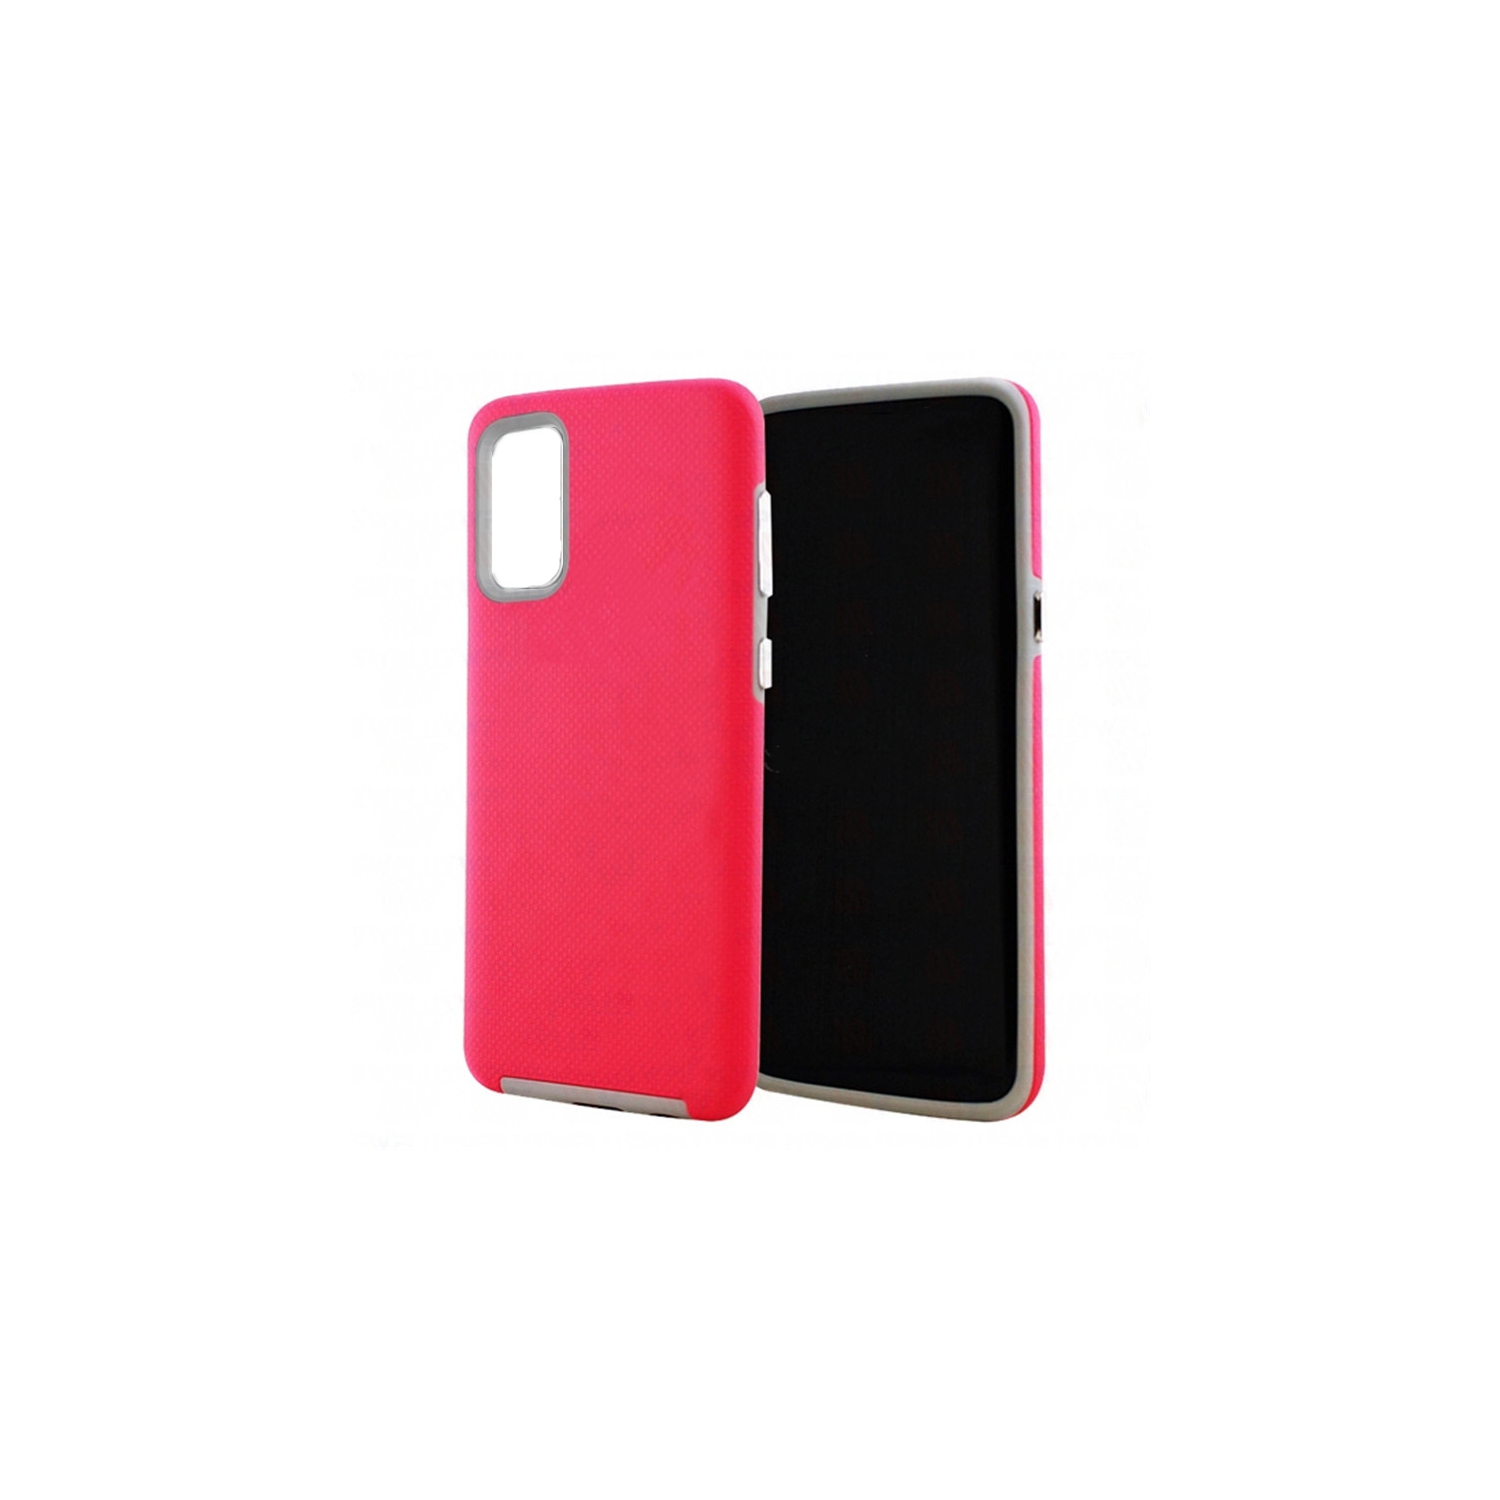 【CSmart】 Slim Fitted Hybrid Hard PC Shell Shockproof Scratch Resistant Case Cover for Samsung Galaxy A32 5G, Hot Pink